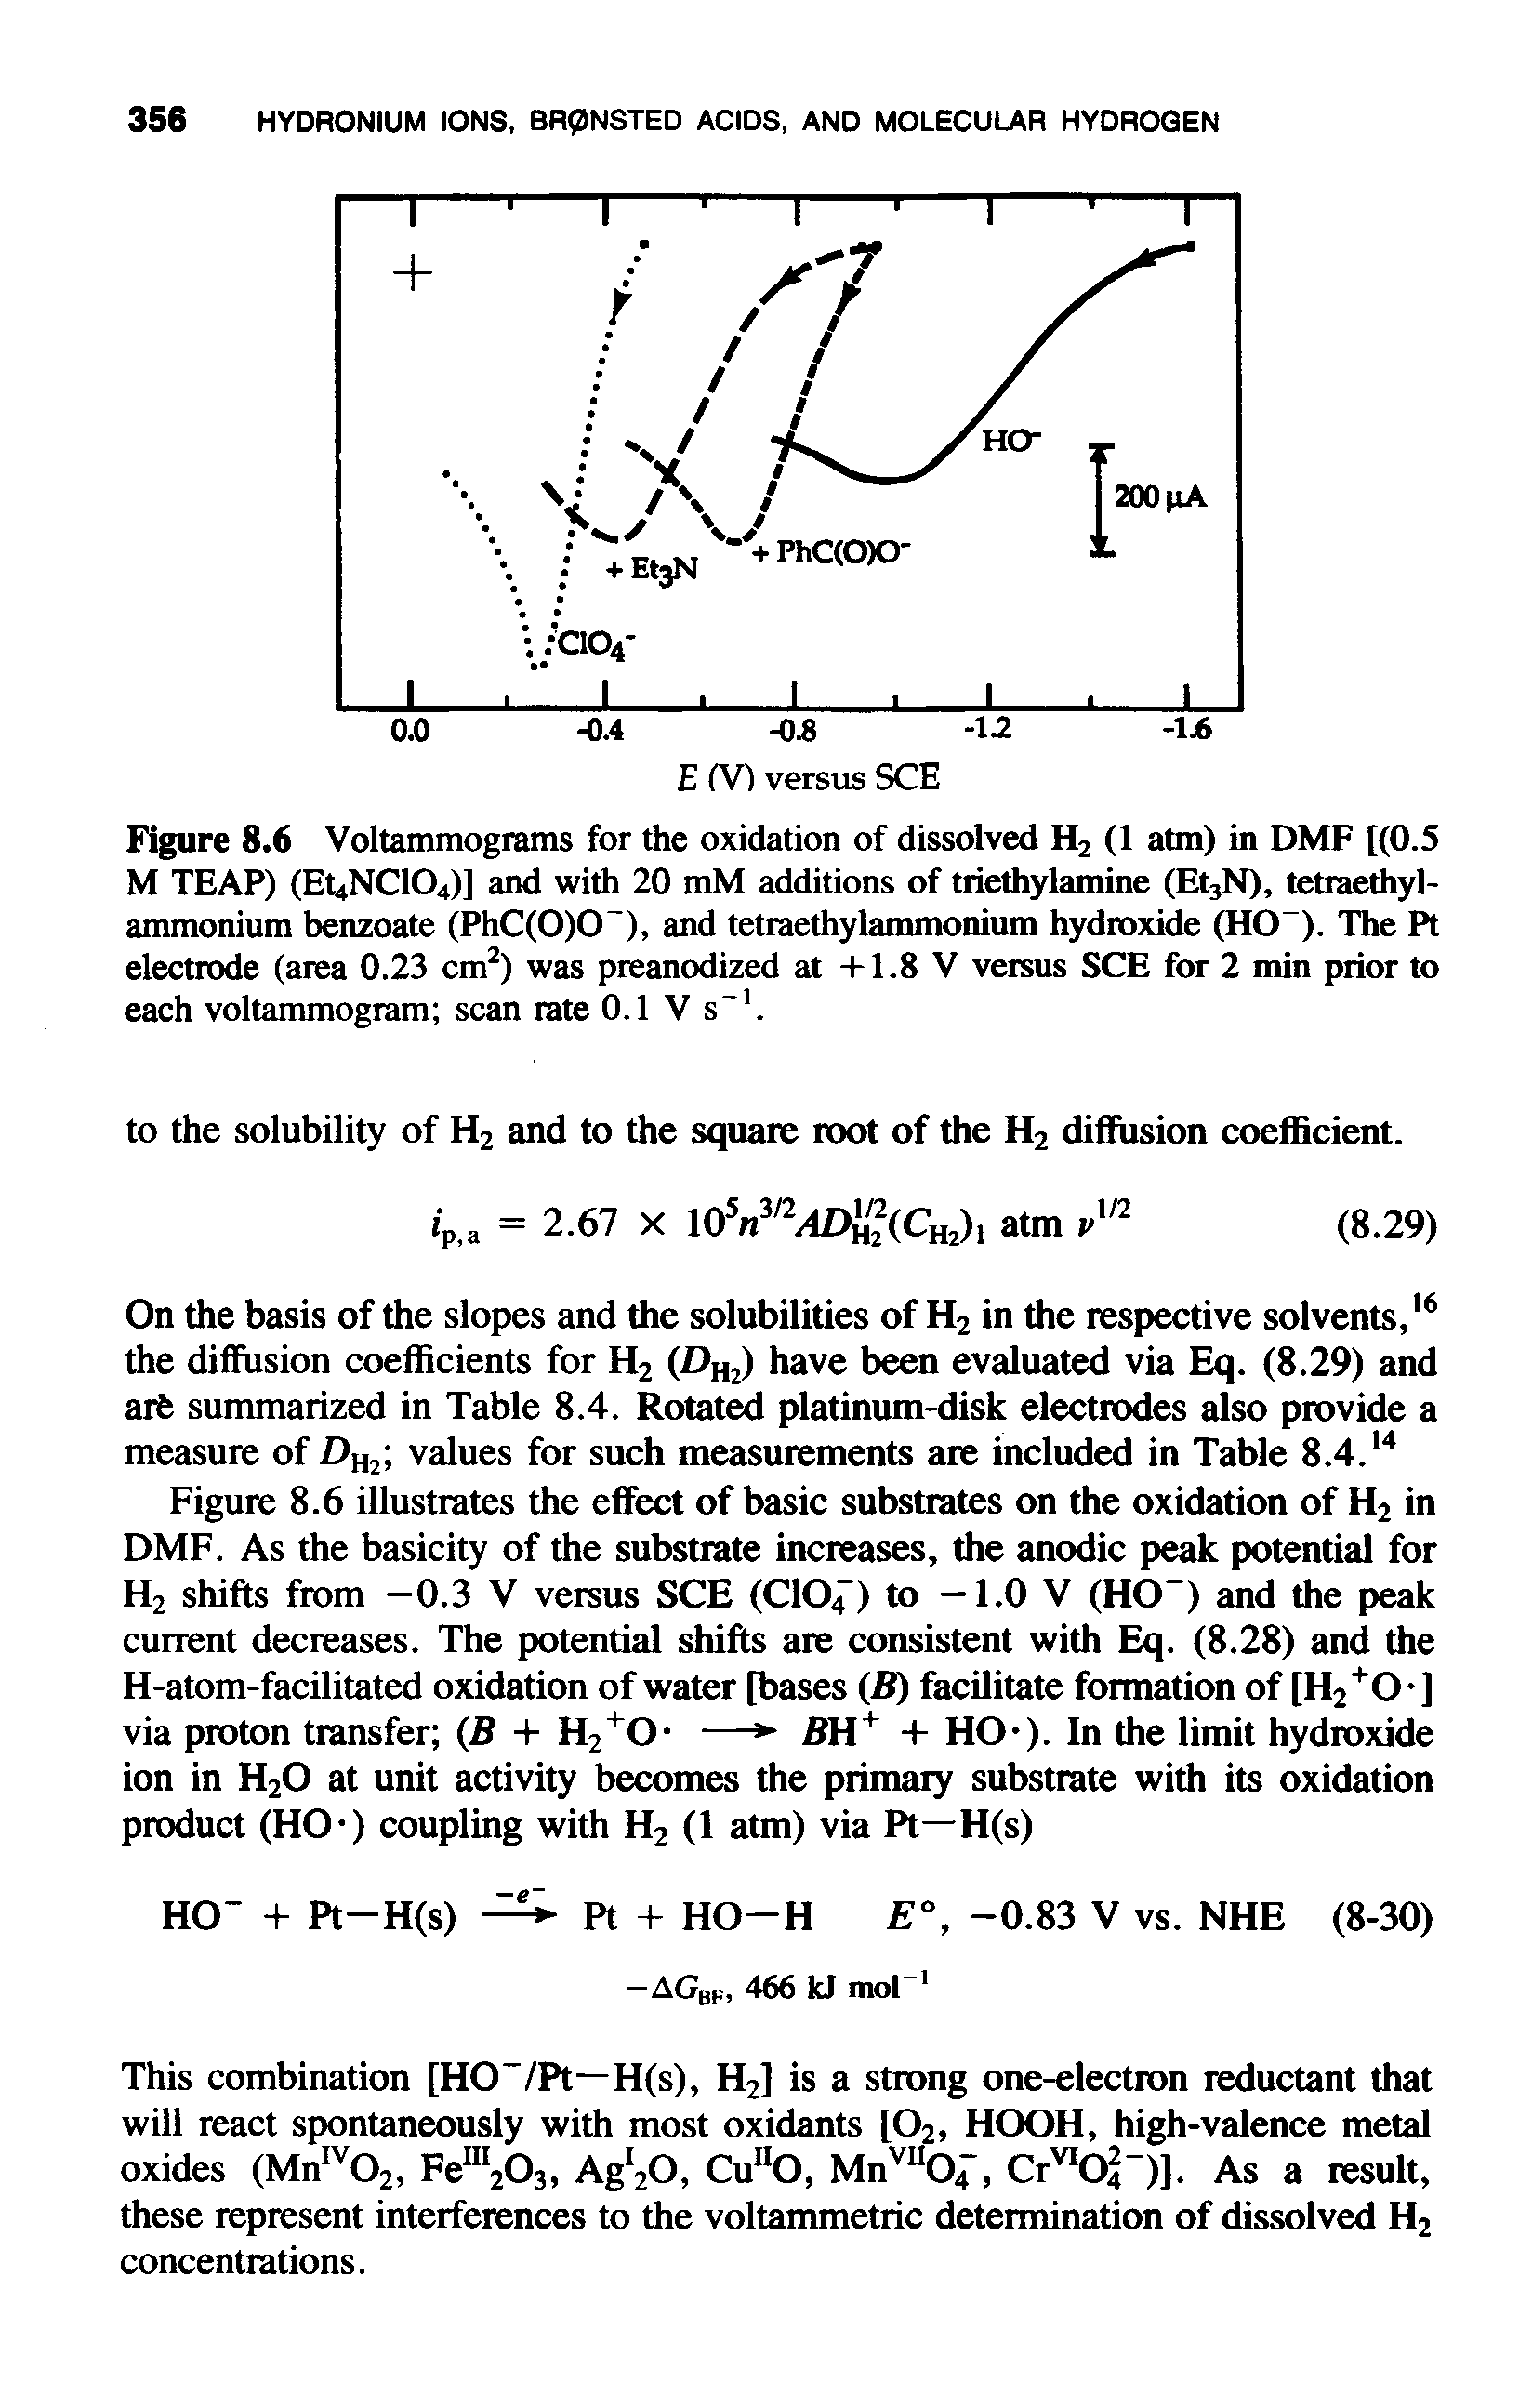 Figure 8.6 Voltammograms for the oxidation of dissolved H2 (1 atm) in DMF [(0.5 M TEAP) (EUNCIOJ] and with 20 raM additions of triethylamine (Et3N), tetraethyl-ammonium benzoate (PhC(O)O-), and tetraethylammonium hydroxide (HO-). The Pt electrode (area 0.23 cm2) was preanodized at +1.8 V versus SCE for 2 min prior to each voltammogram scan rate 0.1 V s-1.